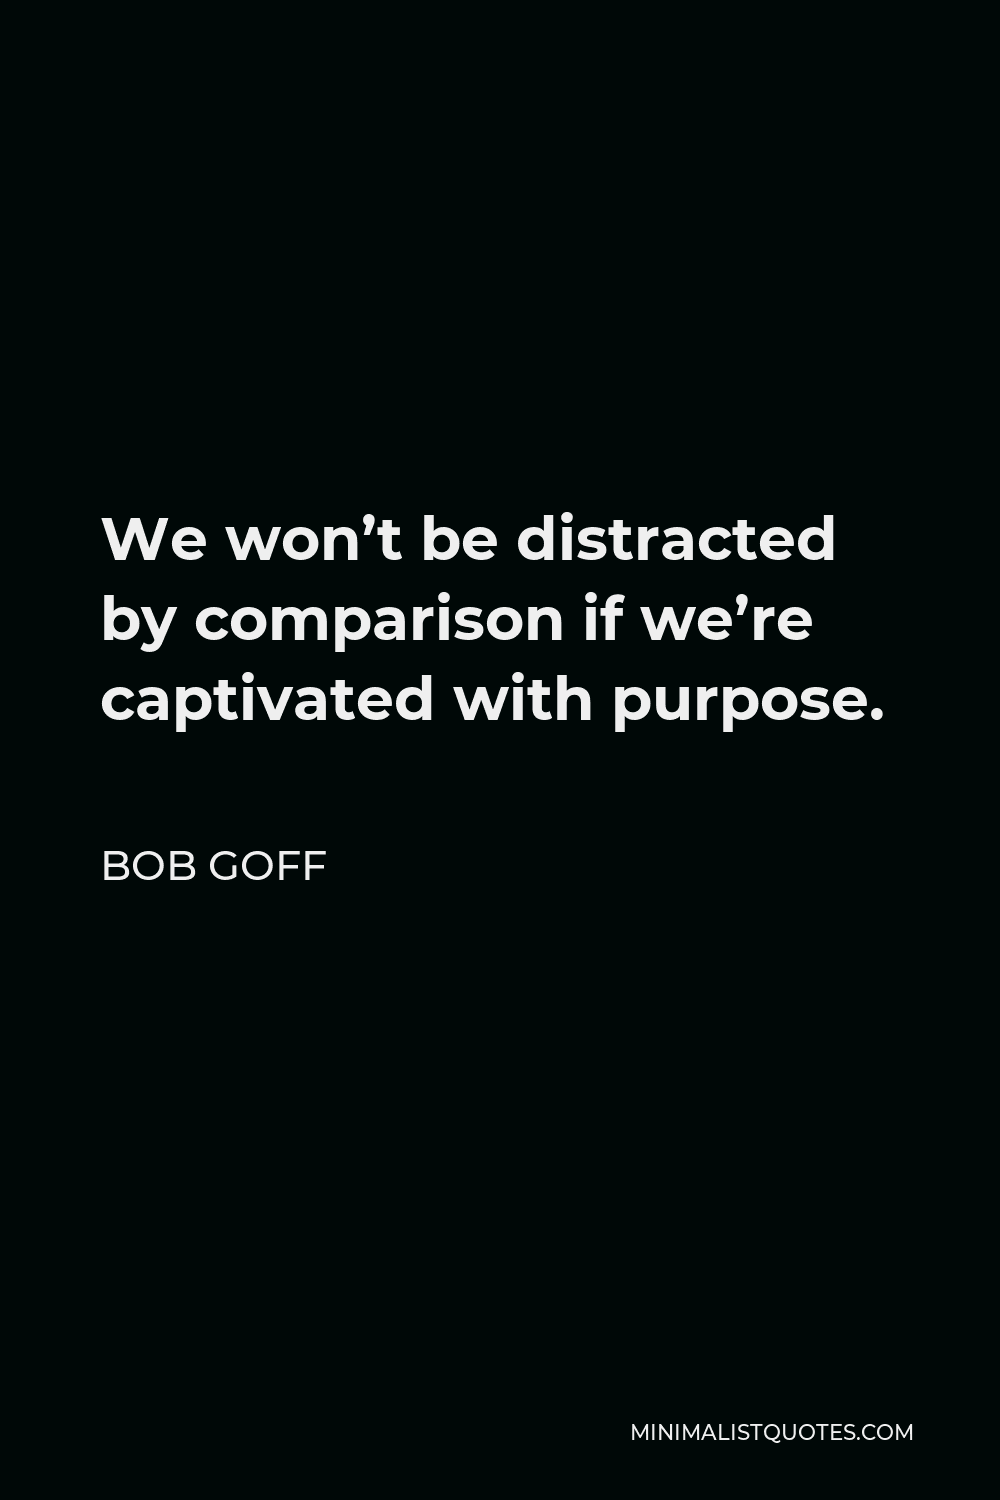 Bob Goff Quote - We won’t be distracted by comparison if we’re captivated with purpose.